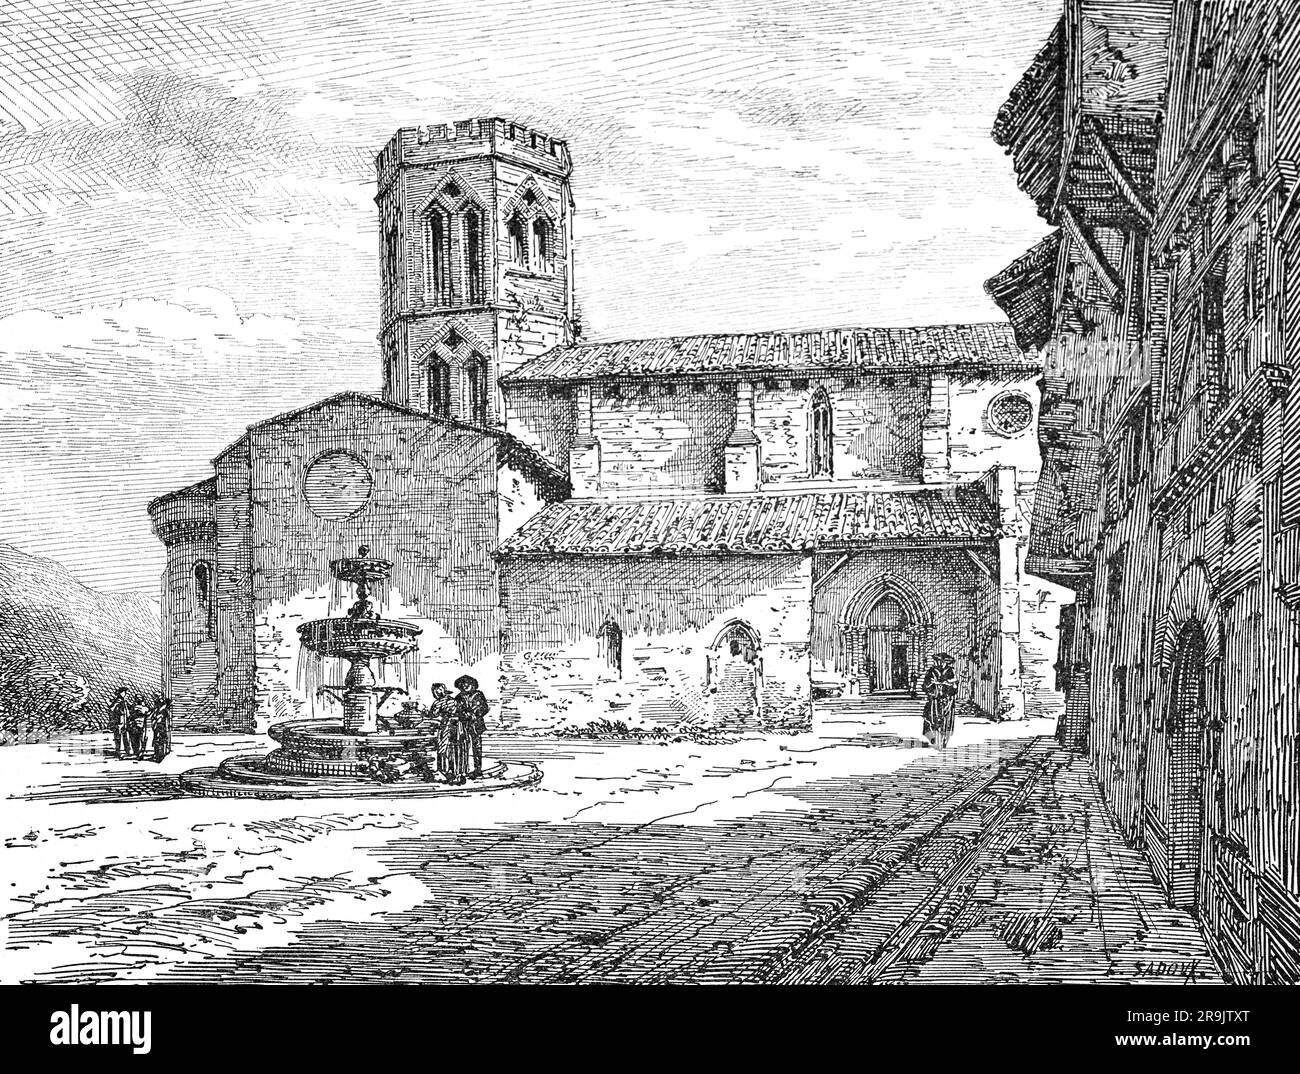 A late 19th century illustration of Saint-Lizier Cathedral in the town of Saint-Lizier in the Arièges Department of Southern France. Dating from the 11th century, with later additions, it is dedicated to Saint Lycerius, an early bishop of Couserans, after whom the town itself is also named. Stock Photo